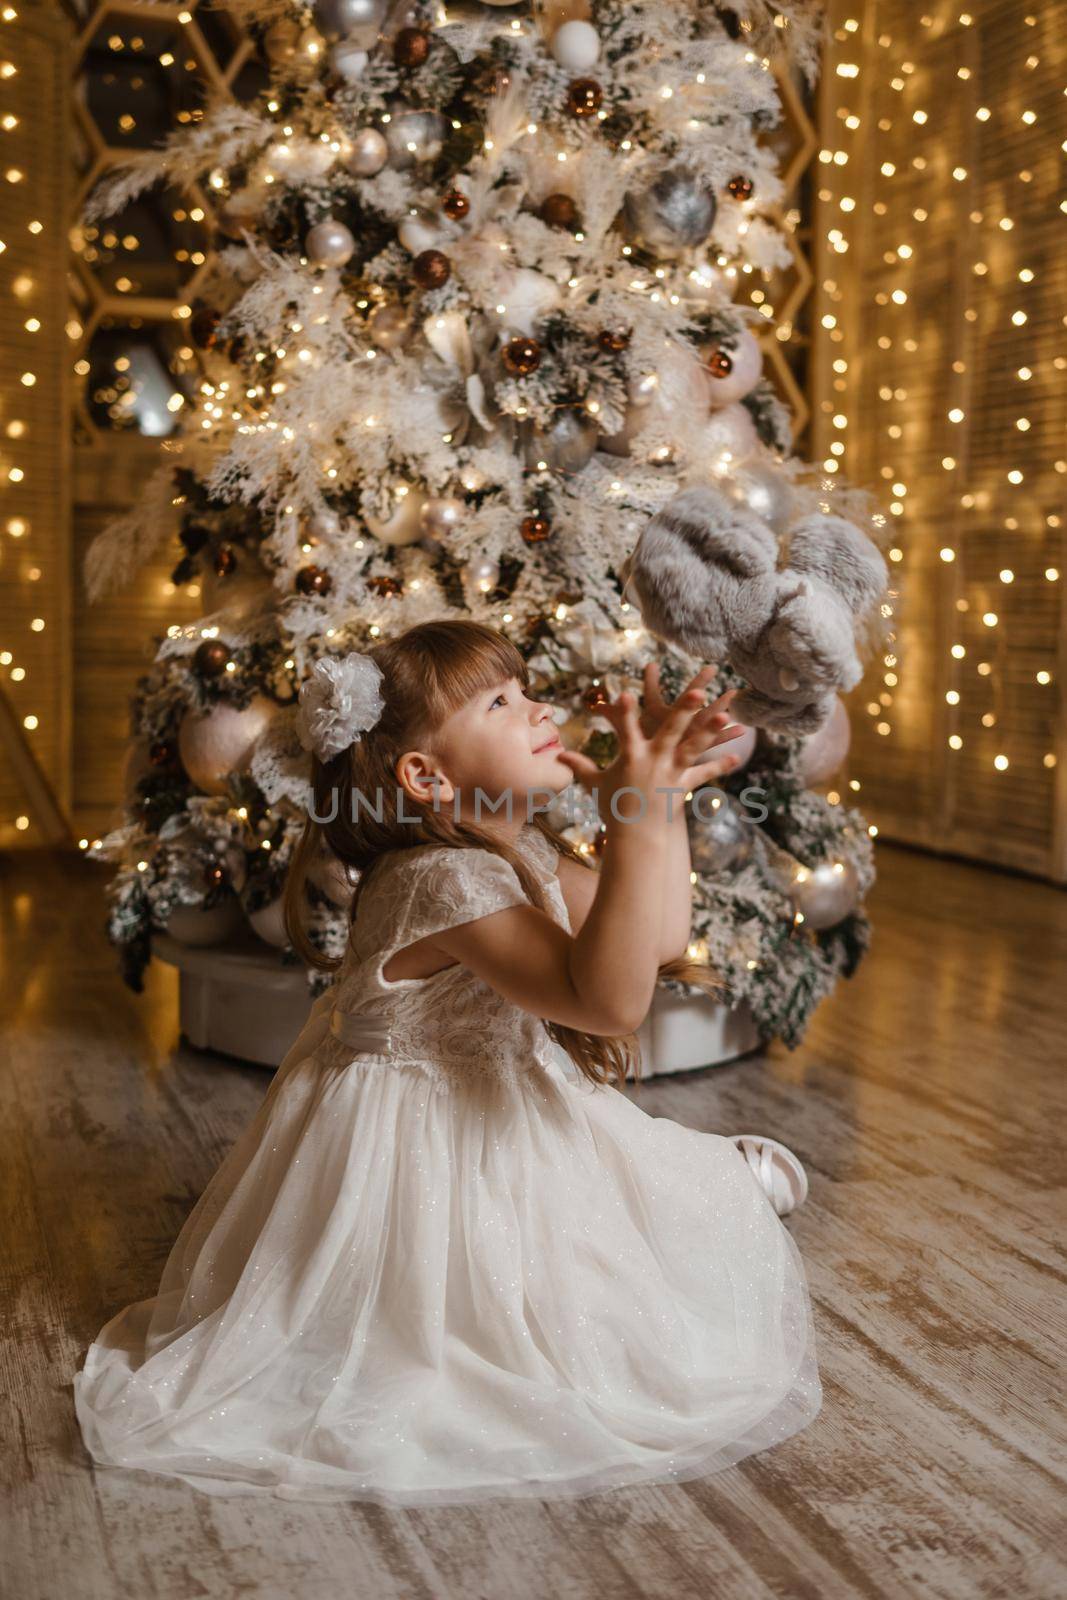 A girl in a festive light dress next to a Christmas tree, lights of garlands in the background. The concept of New Year holidays.